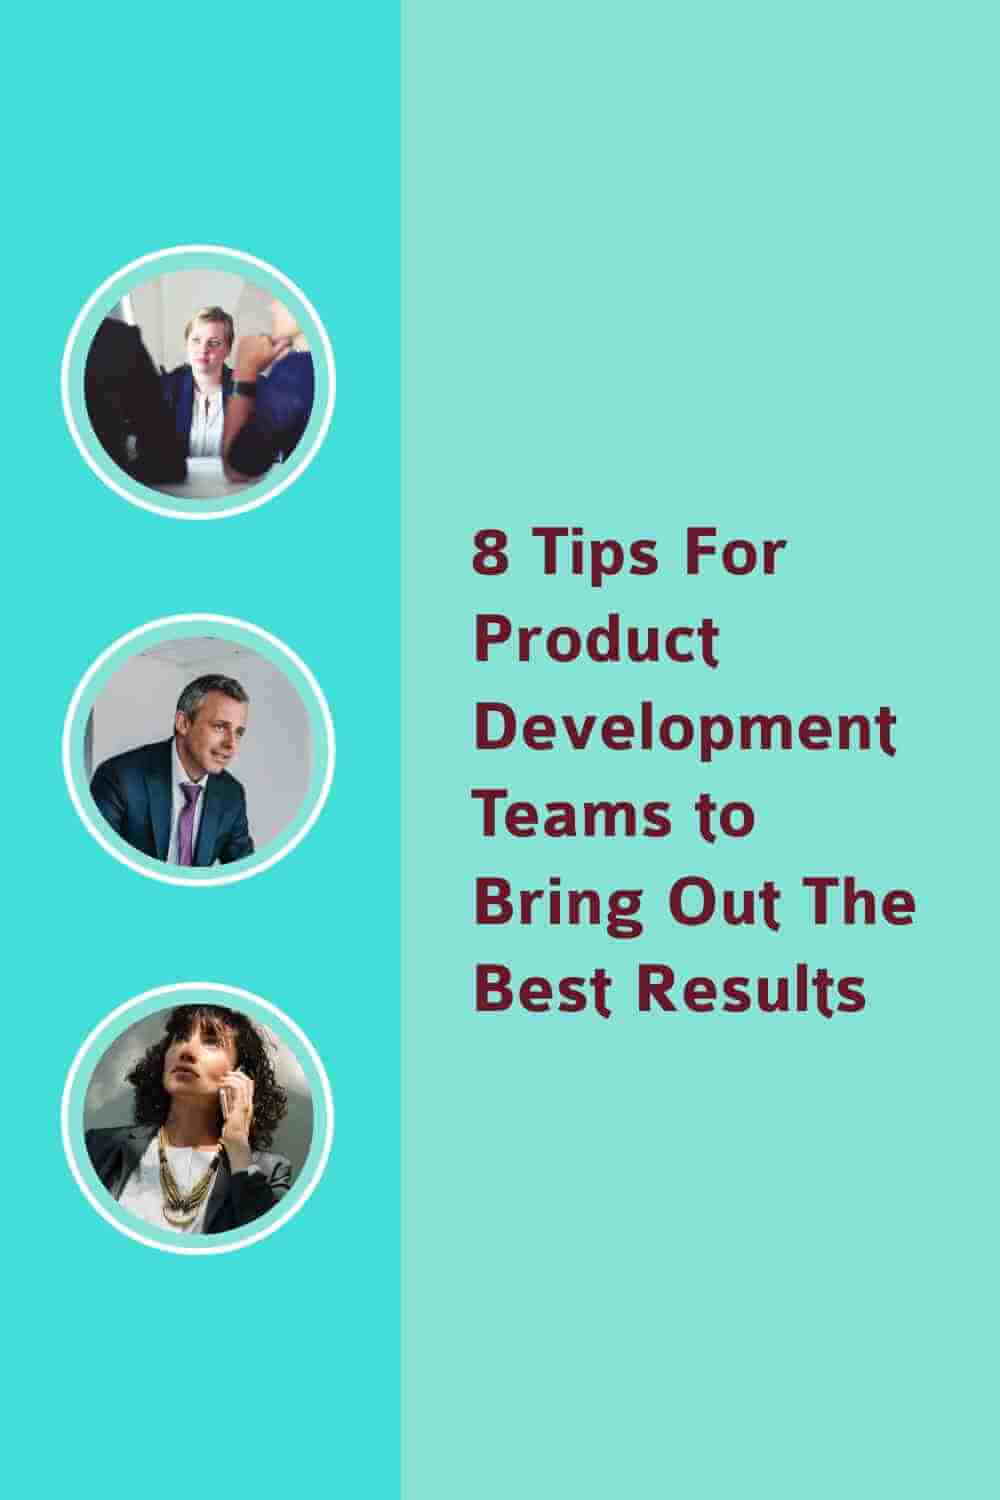 8 Tips for Product Development Teams to Bring Out the Best Results